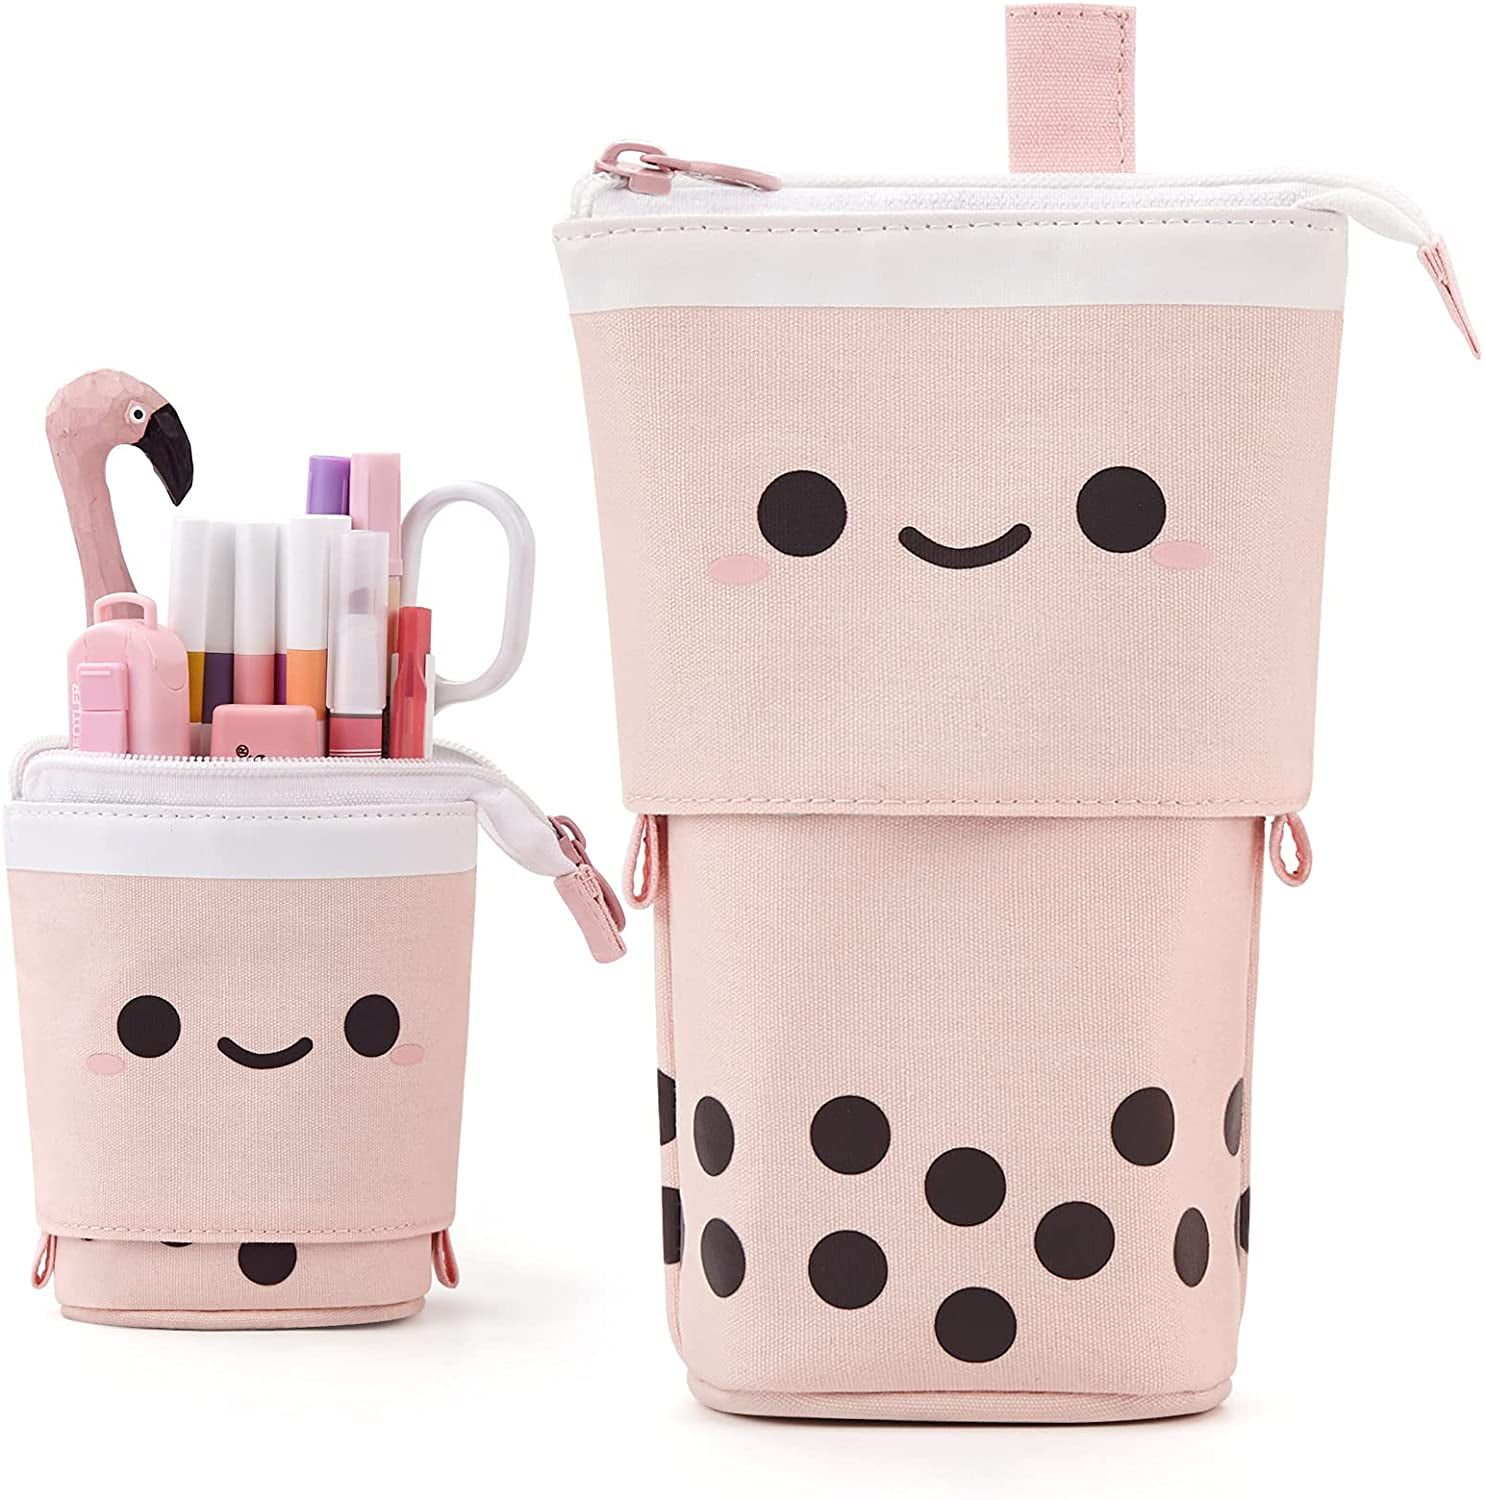 Cute Pencil Case Standing Pen Holder Telescopic Makeup Pouch Pop Up  Cosmetics Bag Stationery Office Organizer Box for Girls Students Women  Adults 